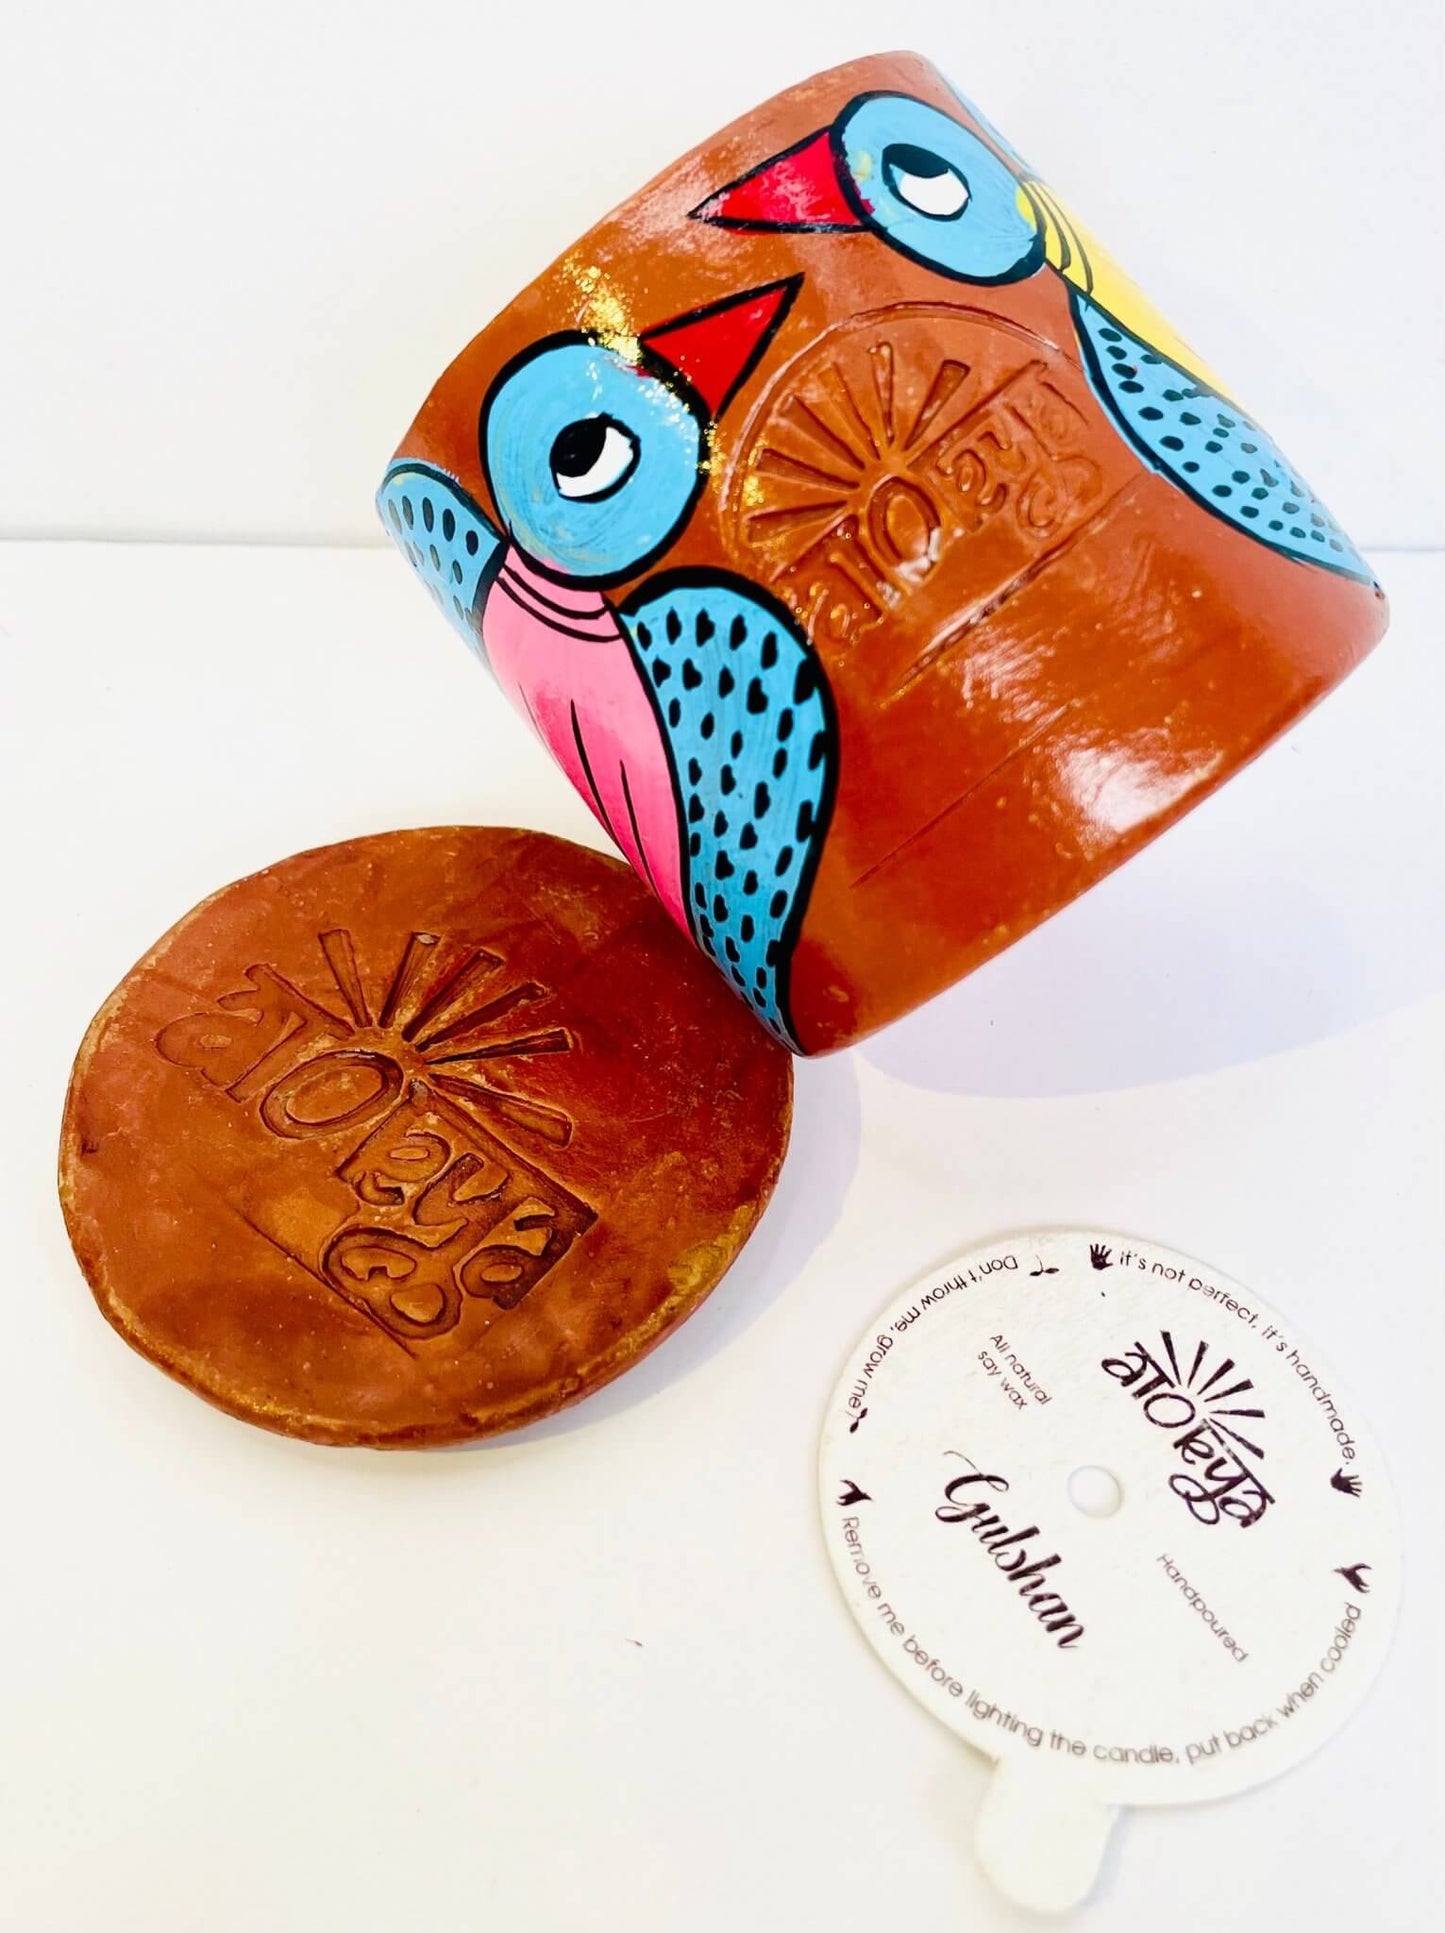 100% natural soy wax scented candle in a terracotta jar hand painted with blue birds having pink and yellow bodies is arranged together with a seed paper candle dust cover and terracotta clay candle snuffer.